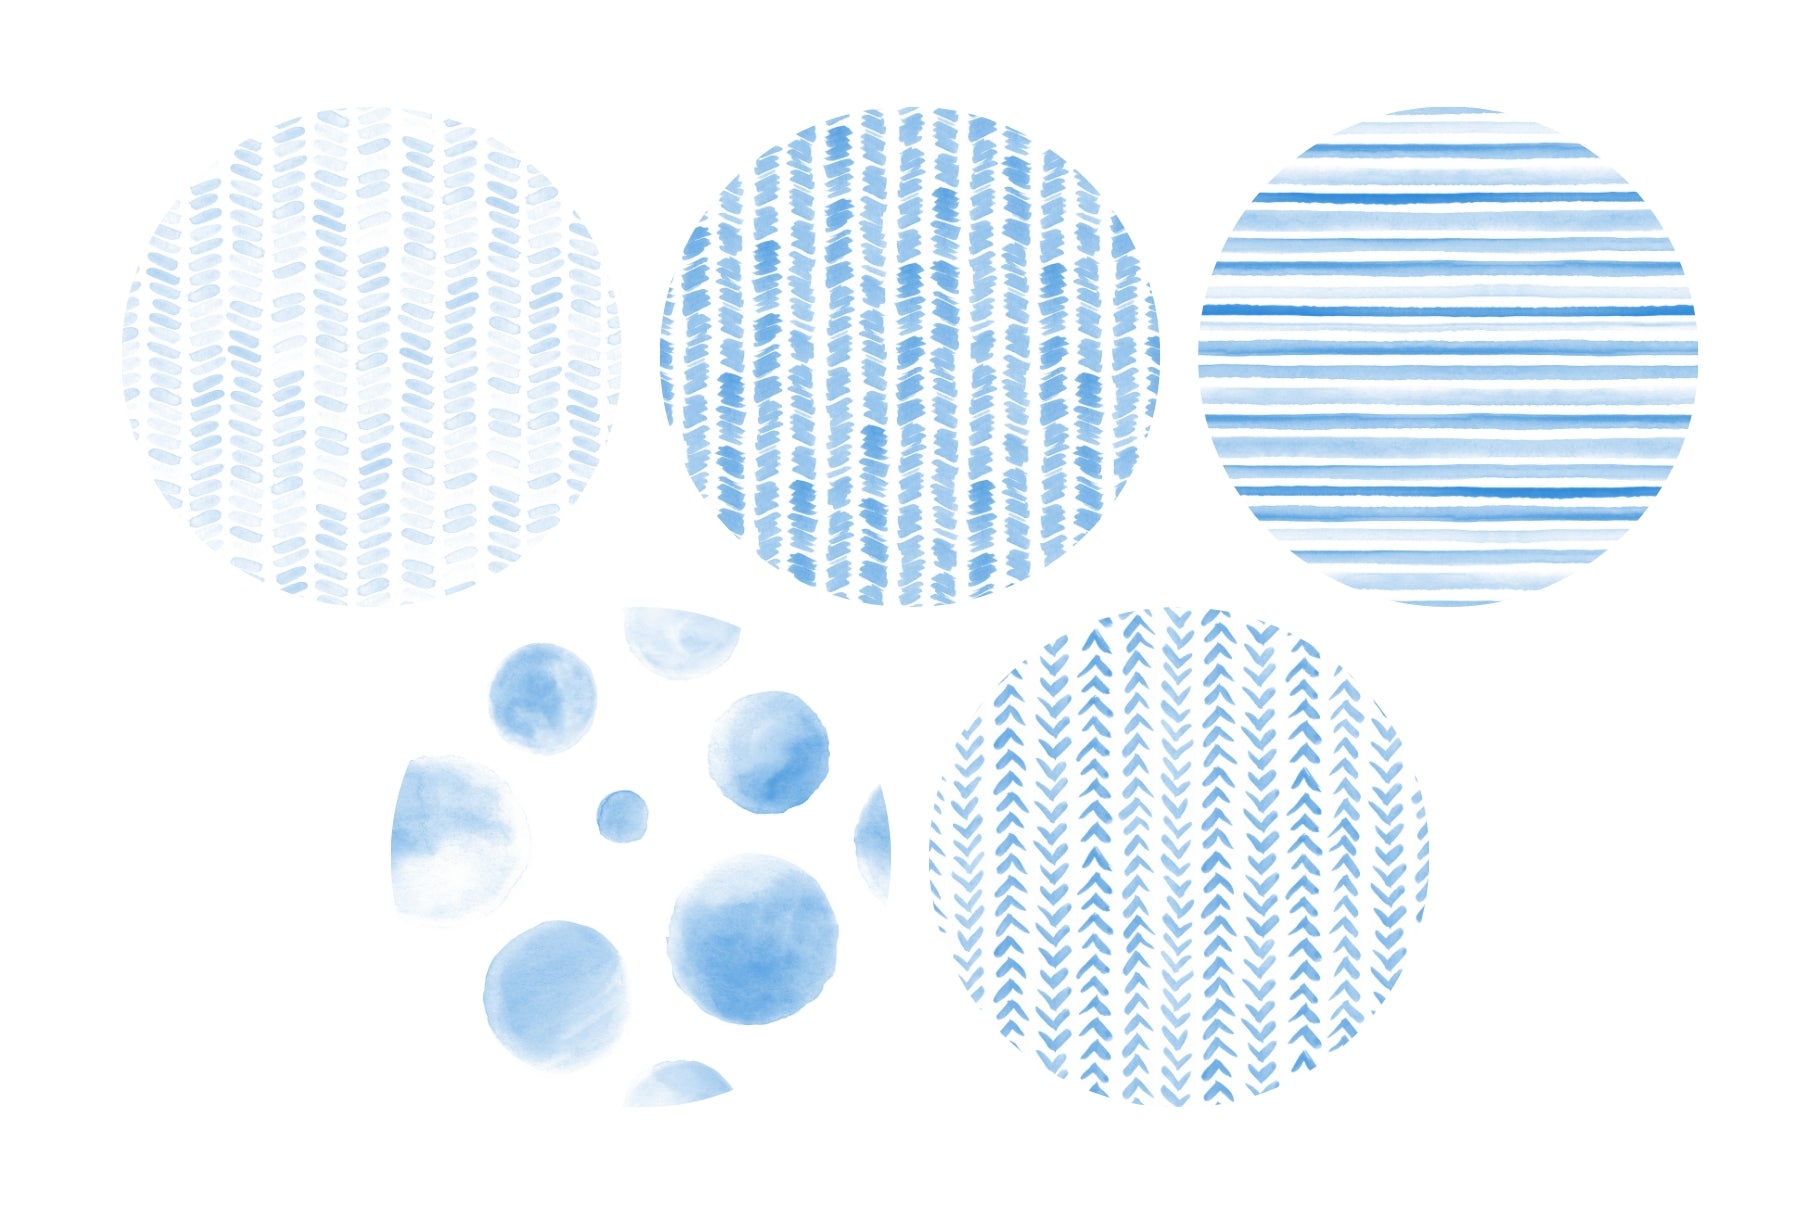 Watercolor Patterns 01 Blue Watercolor Seamless Patterns